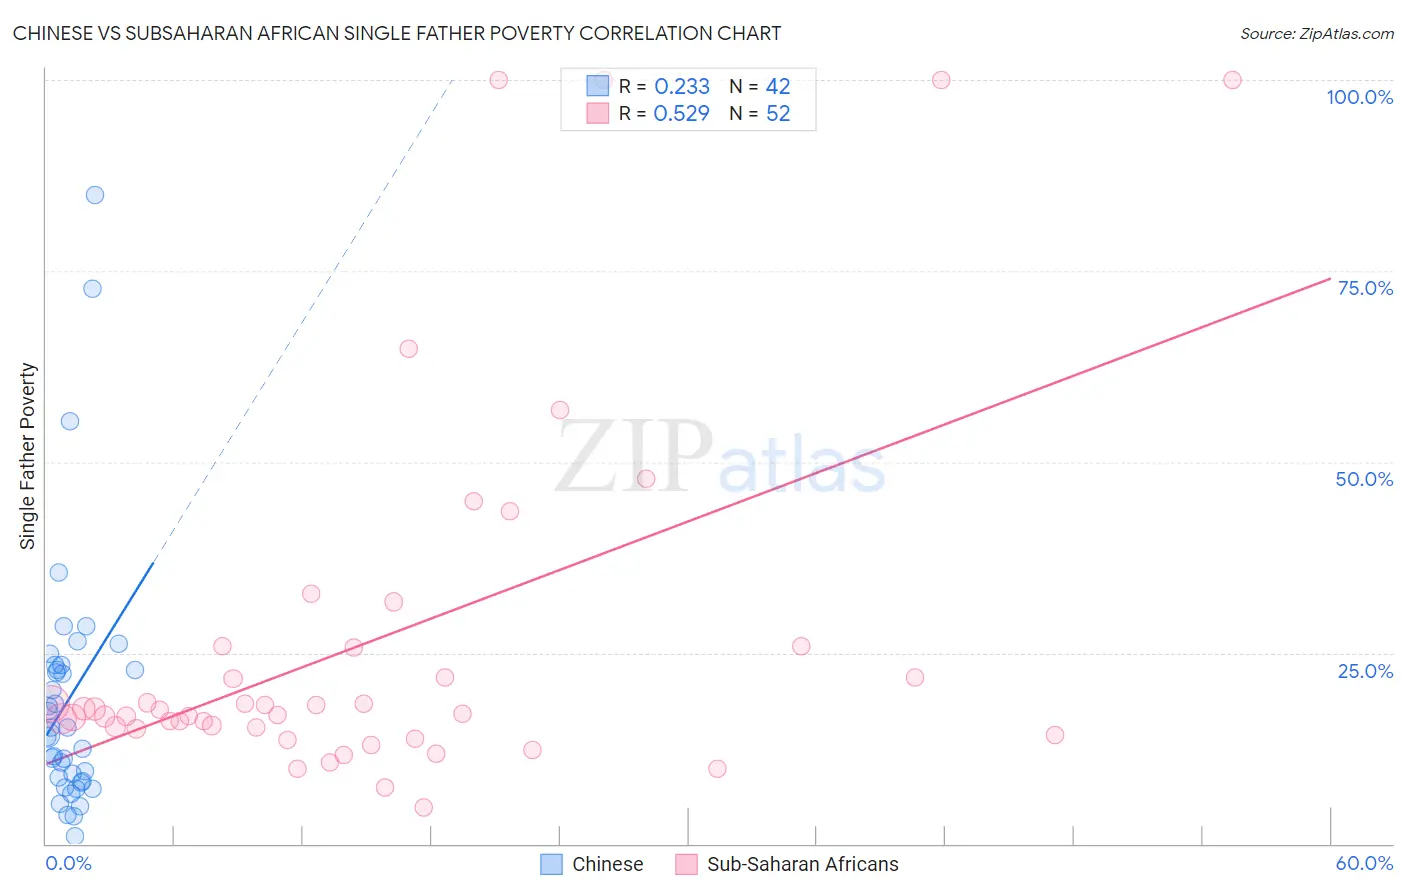 Chinese vs Subsaharan African Single Father Poverty